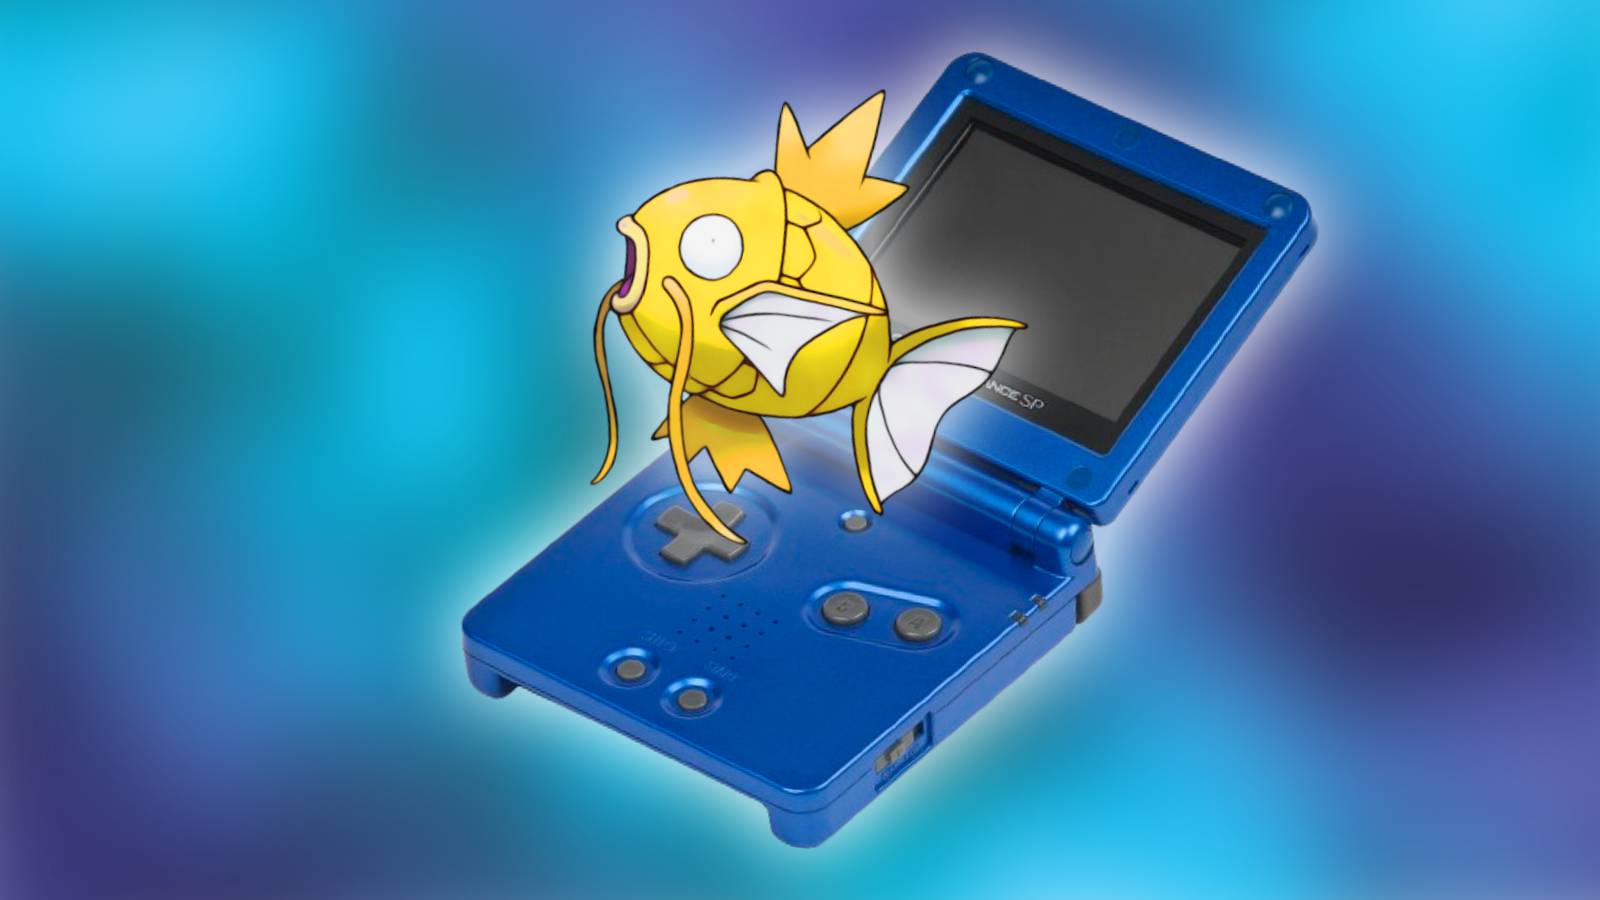 Official art of the Pokemon Magikarp jumping from out a Game Boy Advance SP.